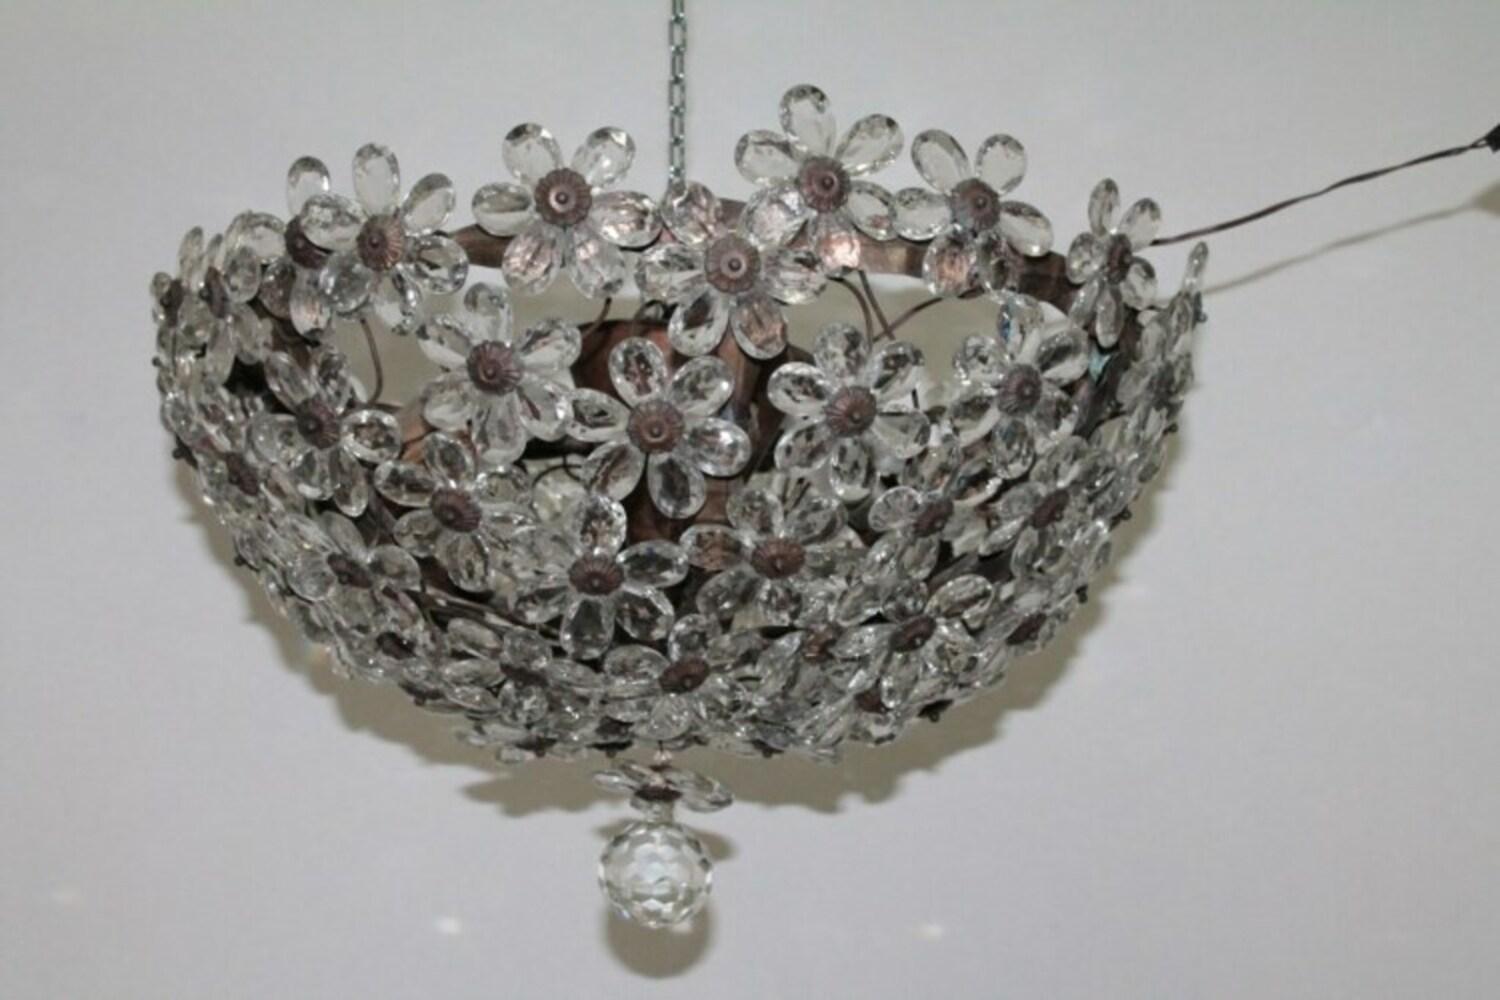 Elegant chandelier 1940s Italian manufacturing with glass flowers and brass structure.